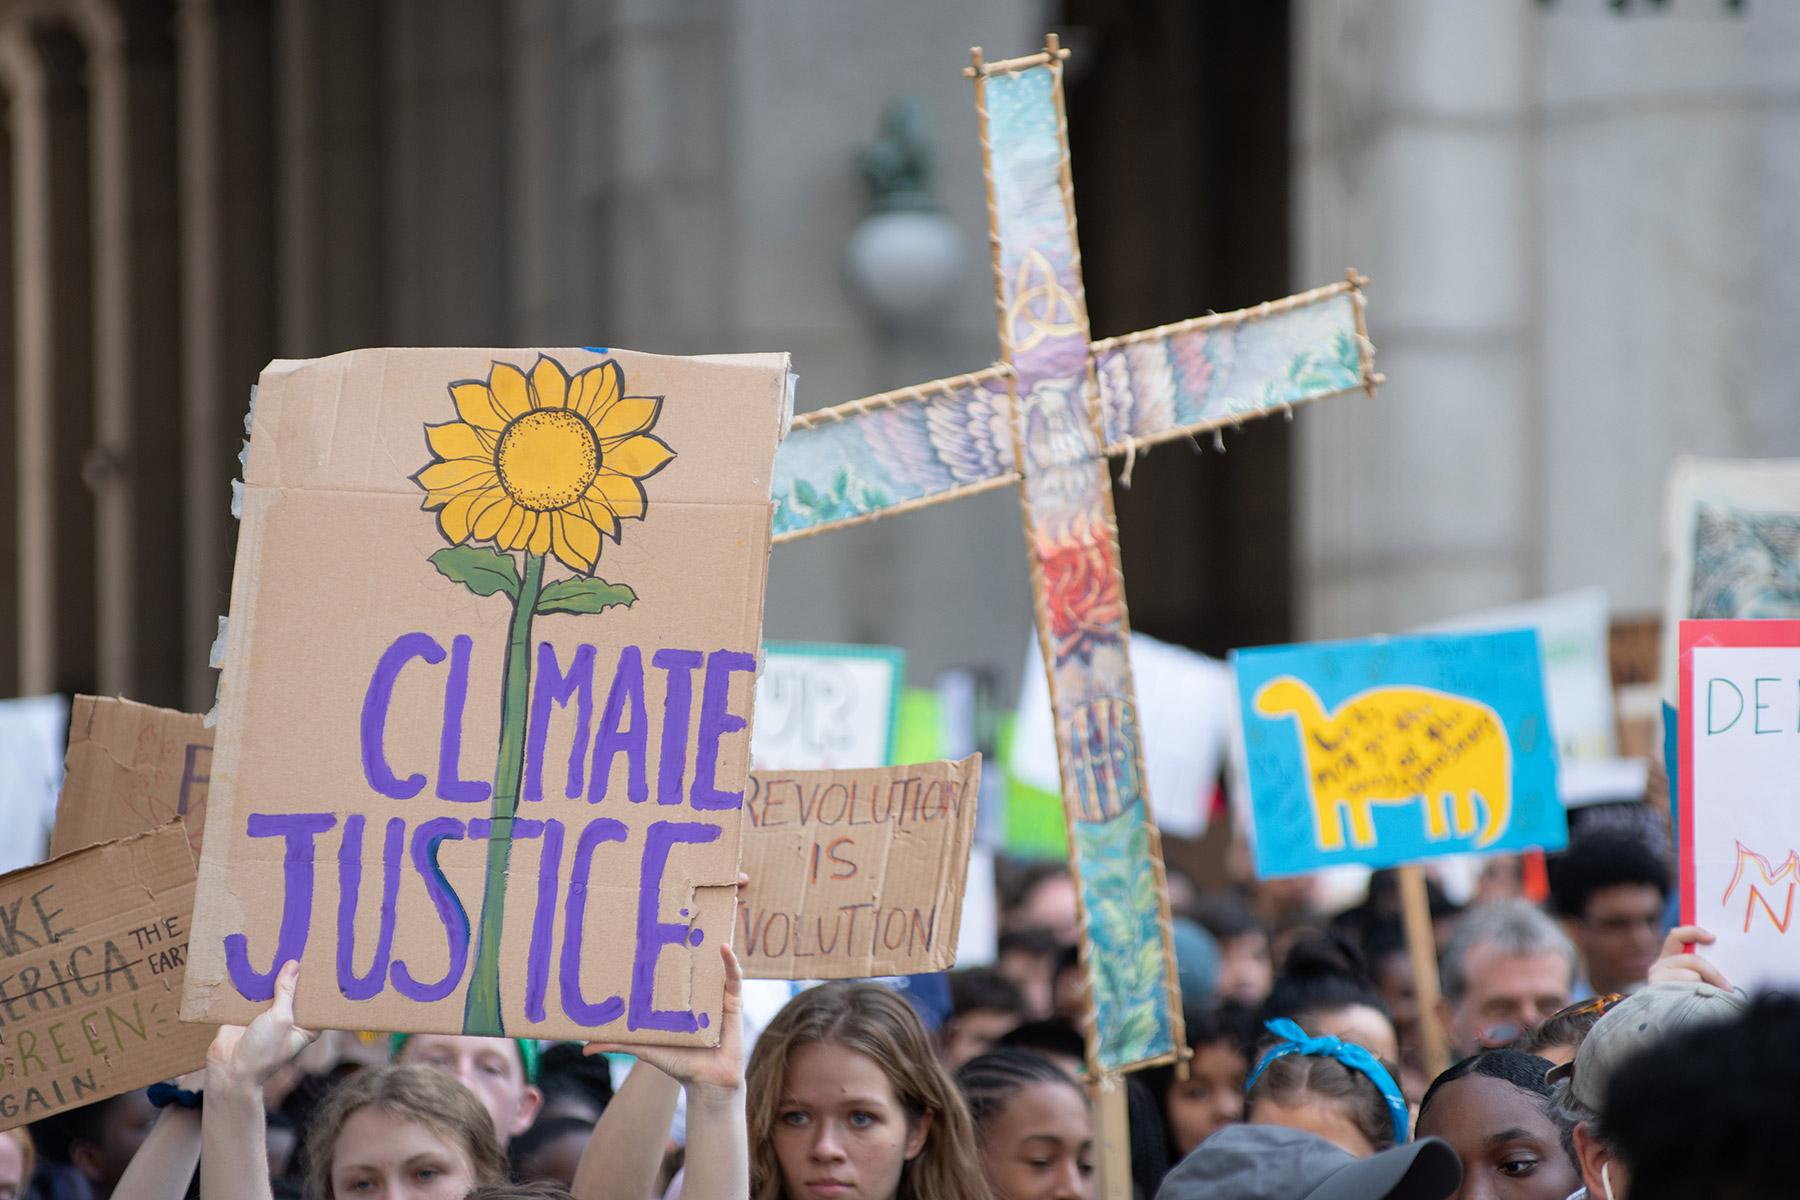 LWF, ACT, WCC and other ecumenical bodies joined tens of thousands in marching through the streets of New York City in the Climate Strike in 2019, demanding climate justice now. Photos: Simon Chambers/ACT  